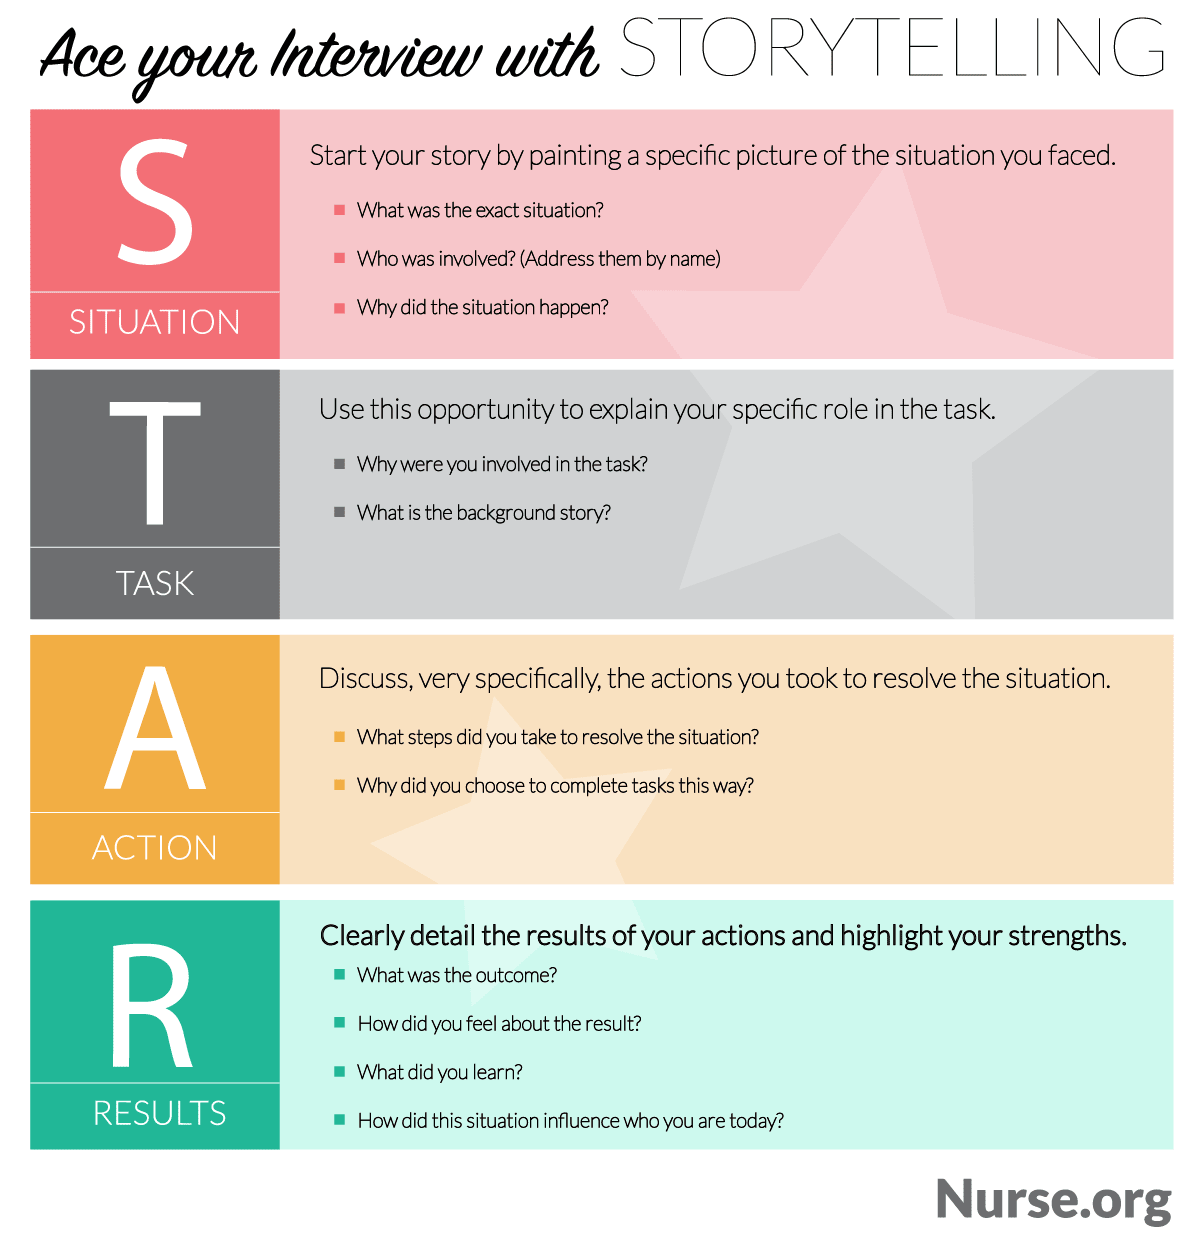 STAR method of interviewing to impress interviewers when applying for a nurse job